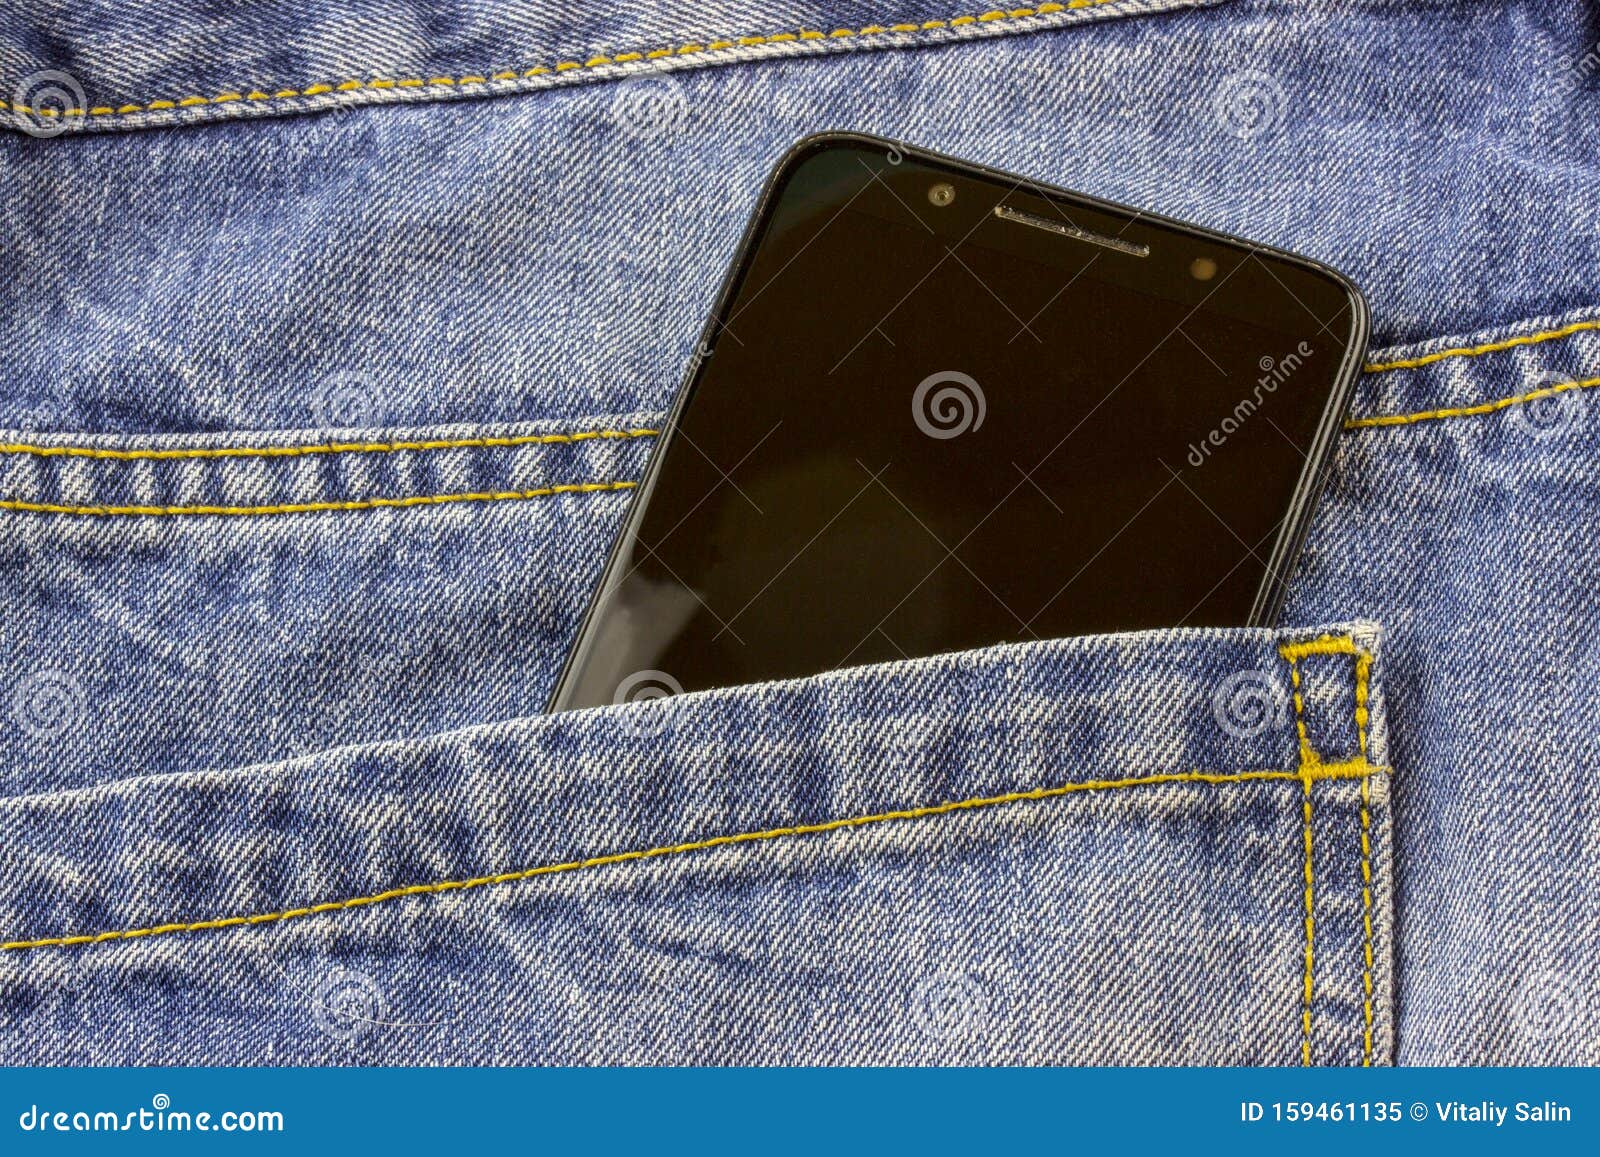 Modern Smartphone in the Pocket of Jeans, Close-up, Cell Phone in the ...